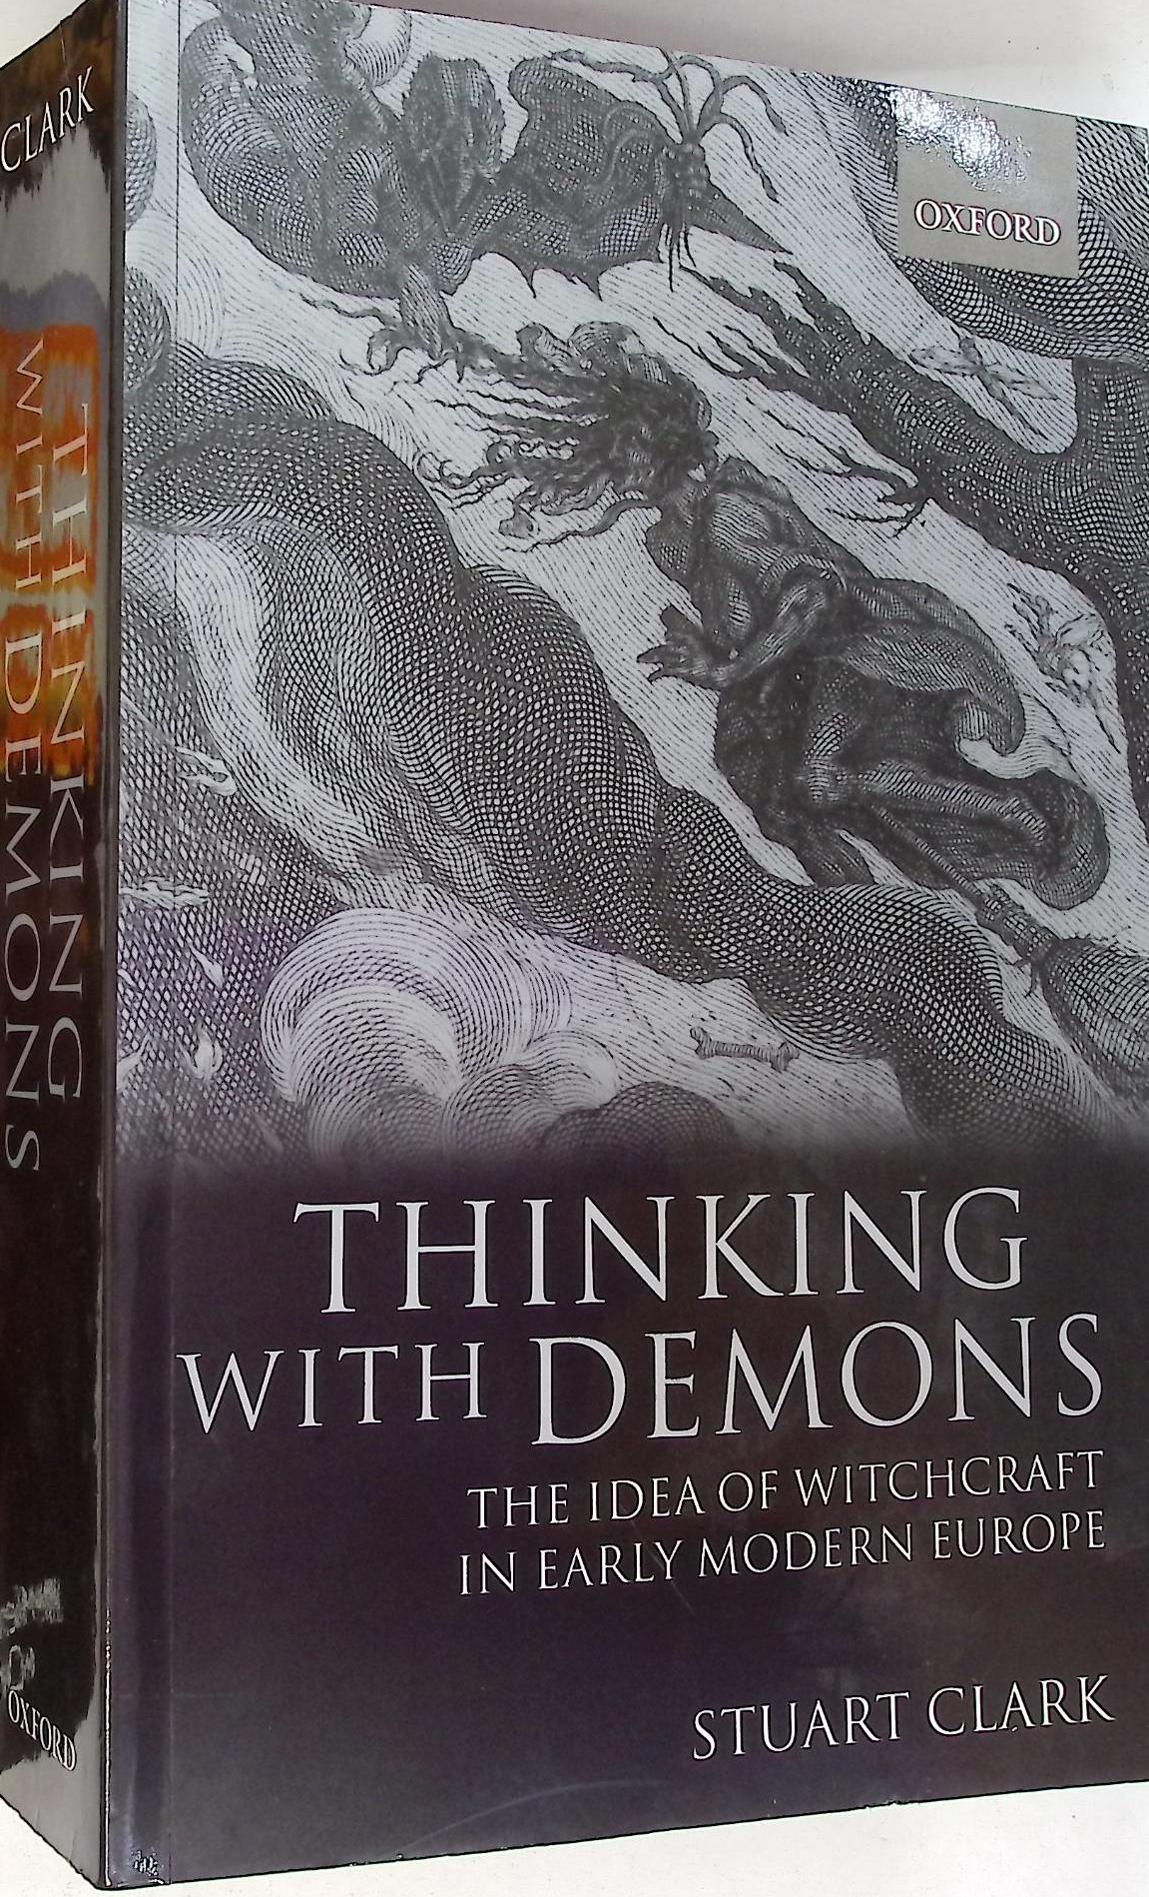 Thinking With Demons. The Idea of Witchcraft in Early Modern Europe.